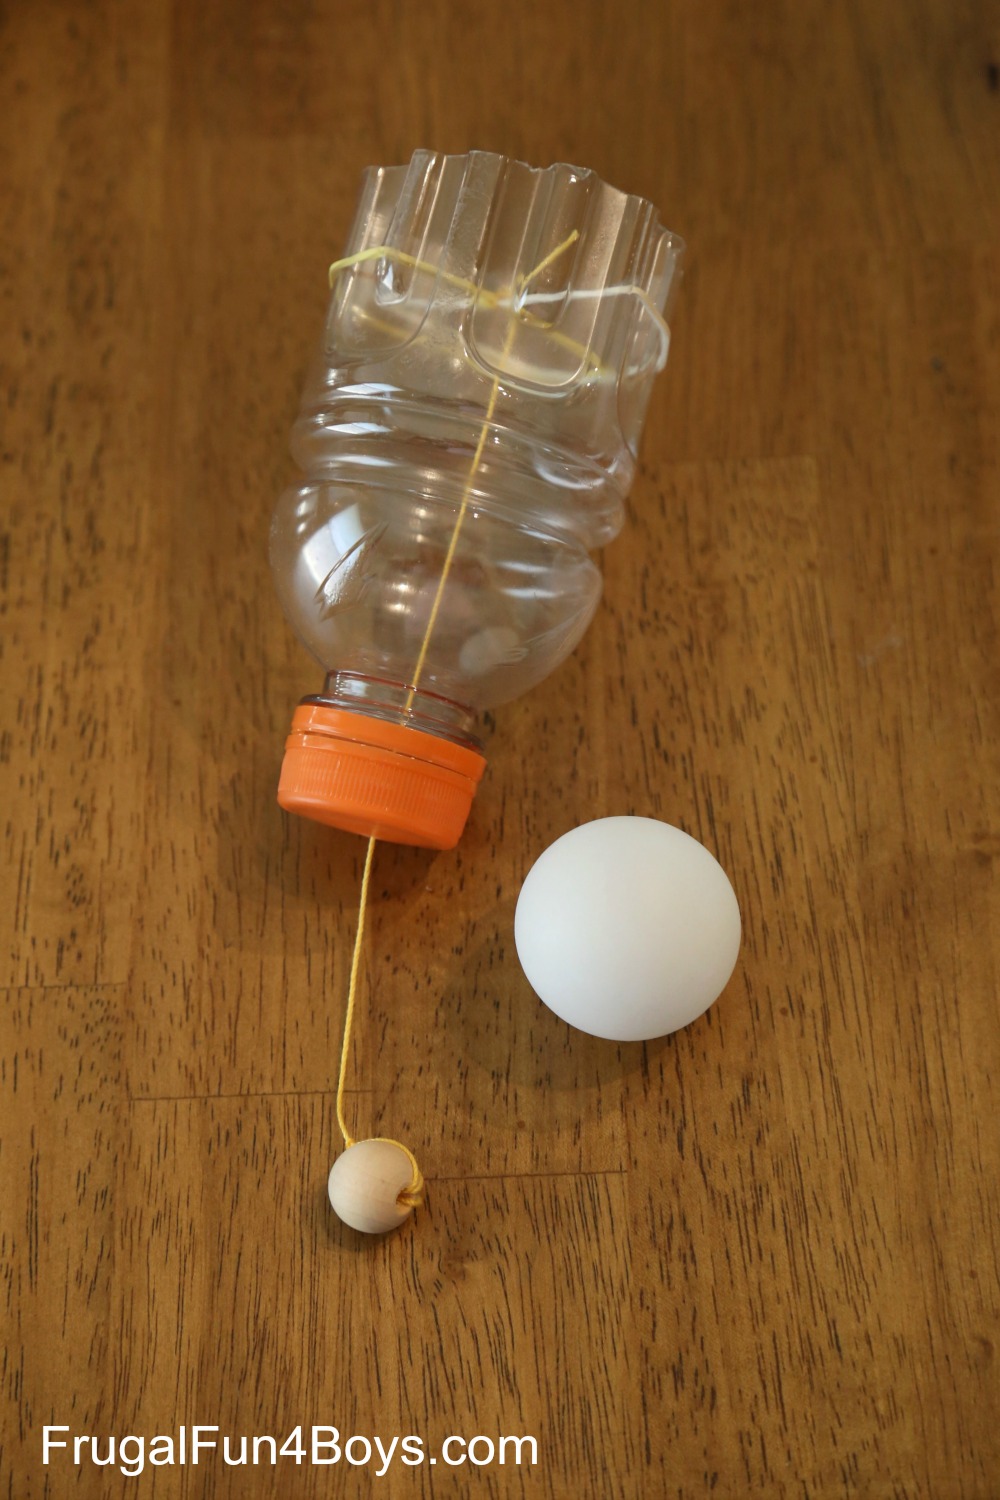 Play the Ping Pong Ball! Make a homemade shotgun from a plastic bottle.